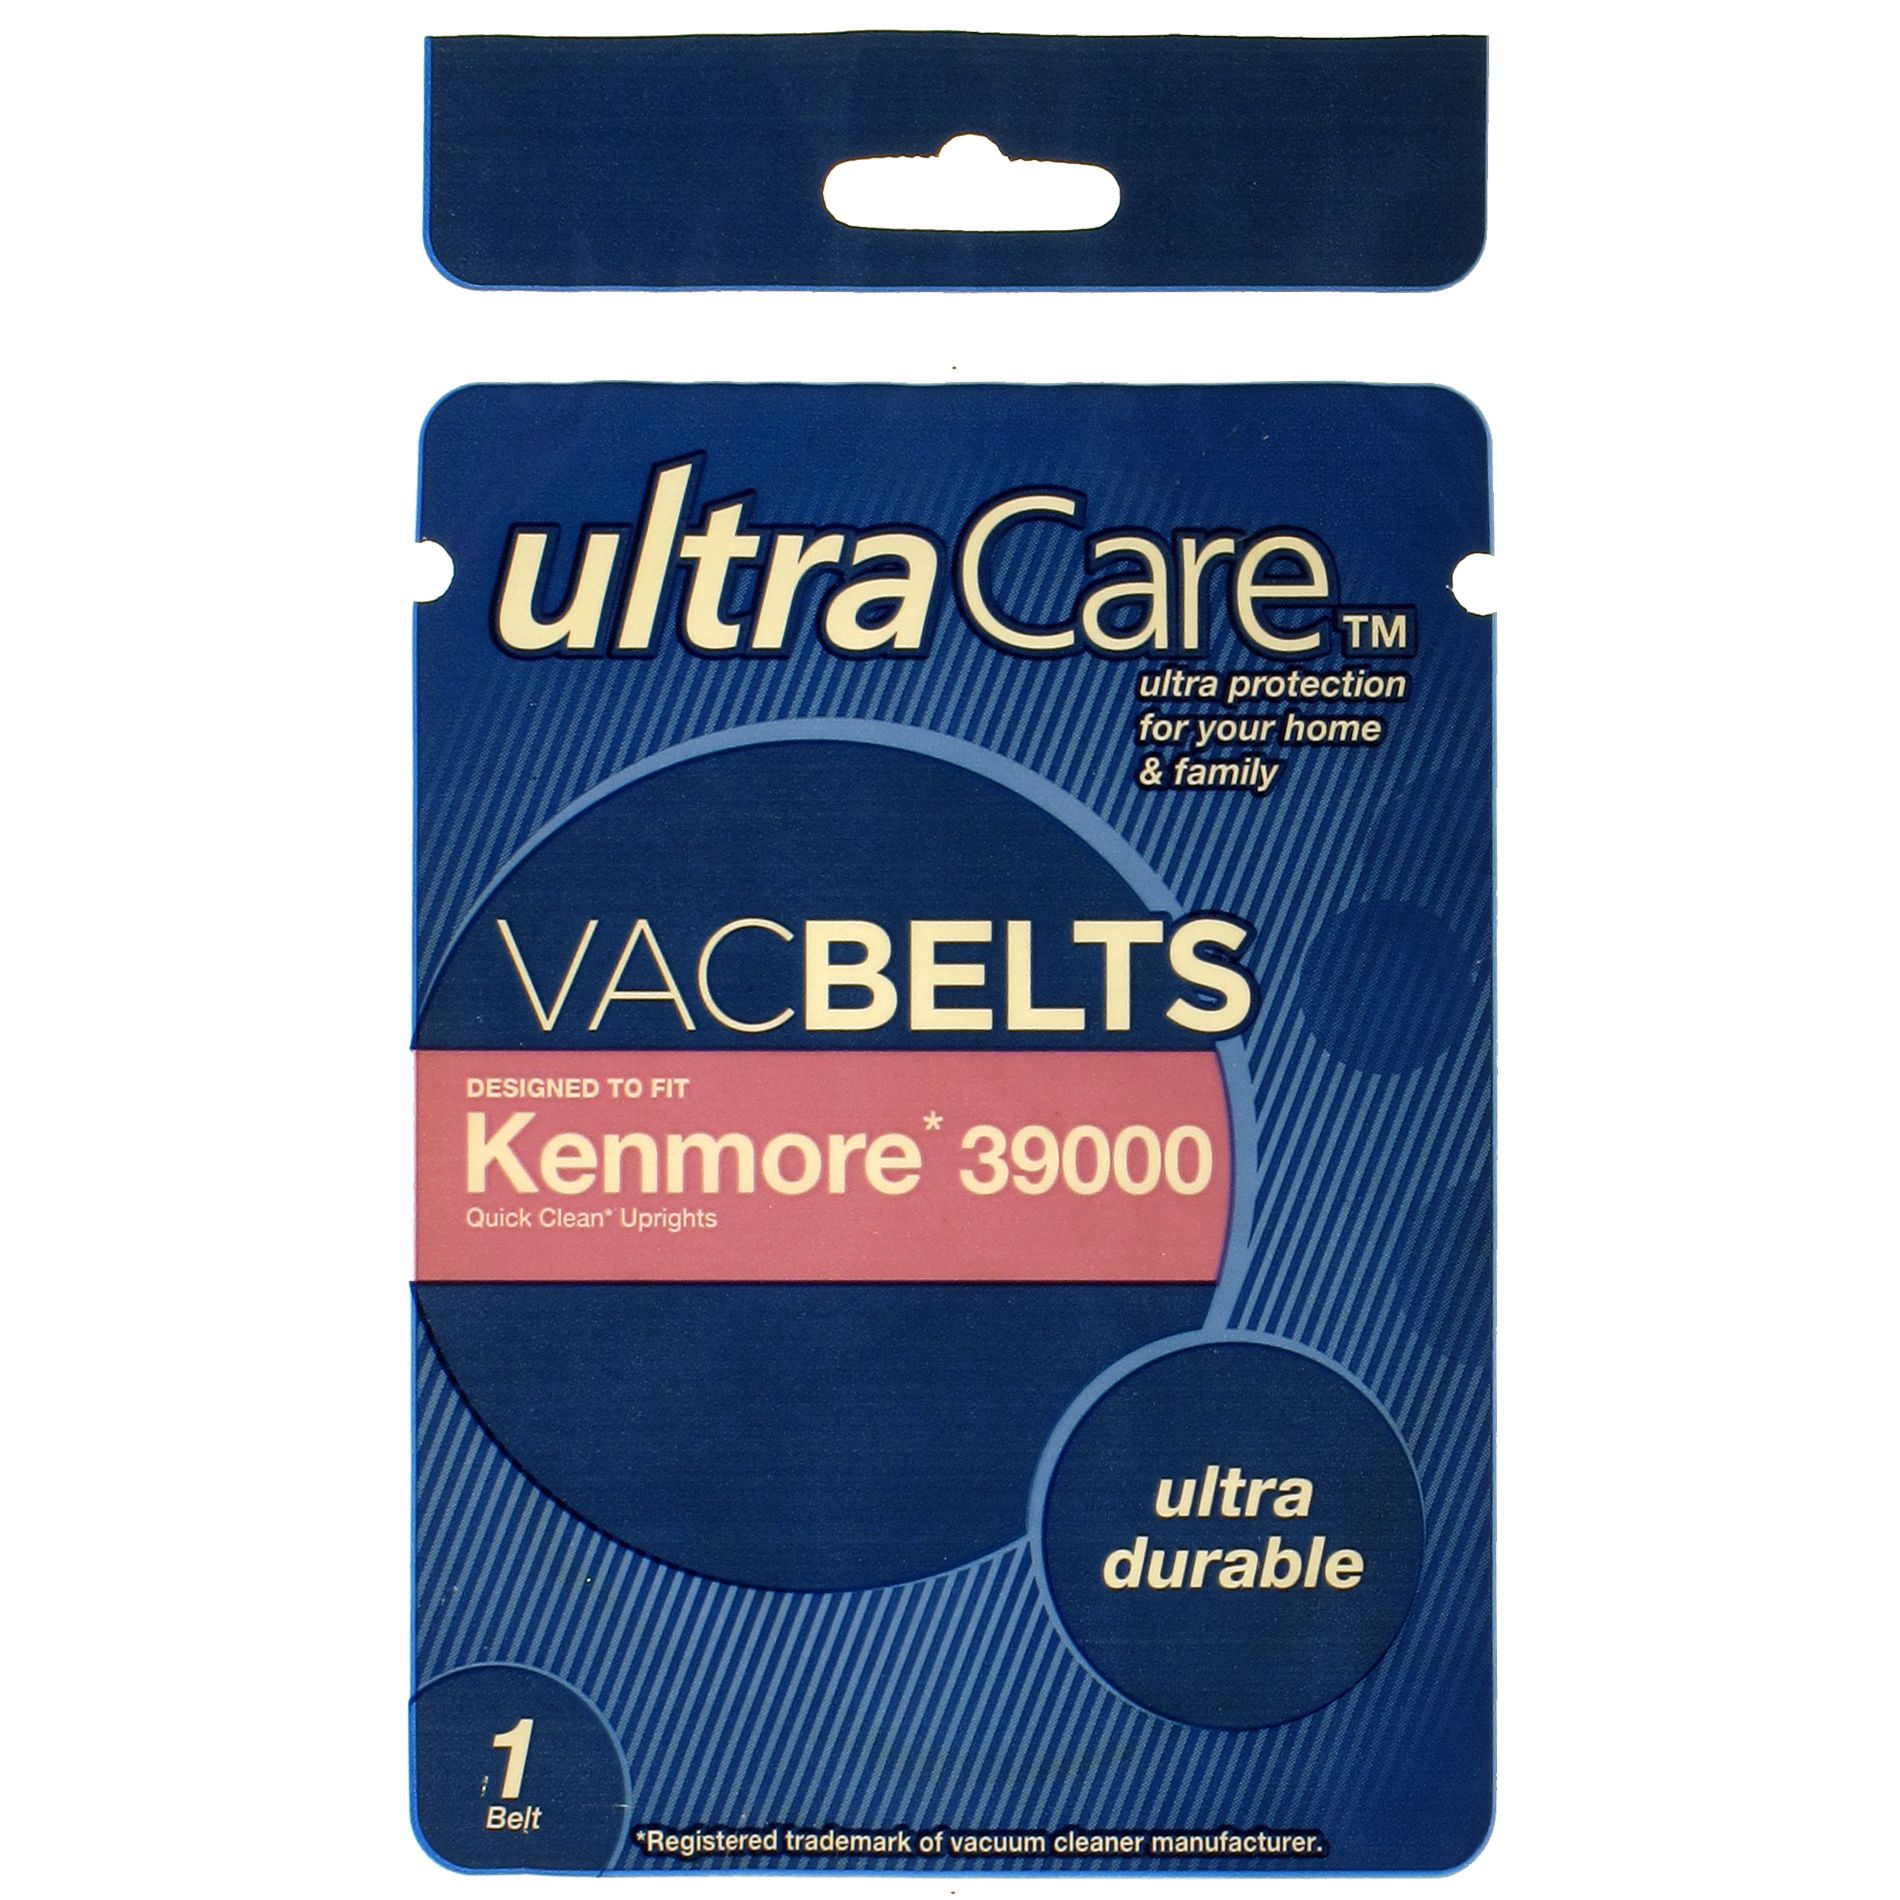 UltraCare 57003 VacBelts for Kenmore 39000 Upright Vacuums